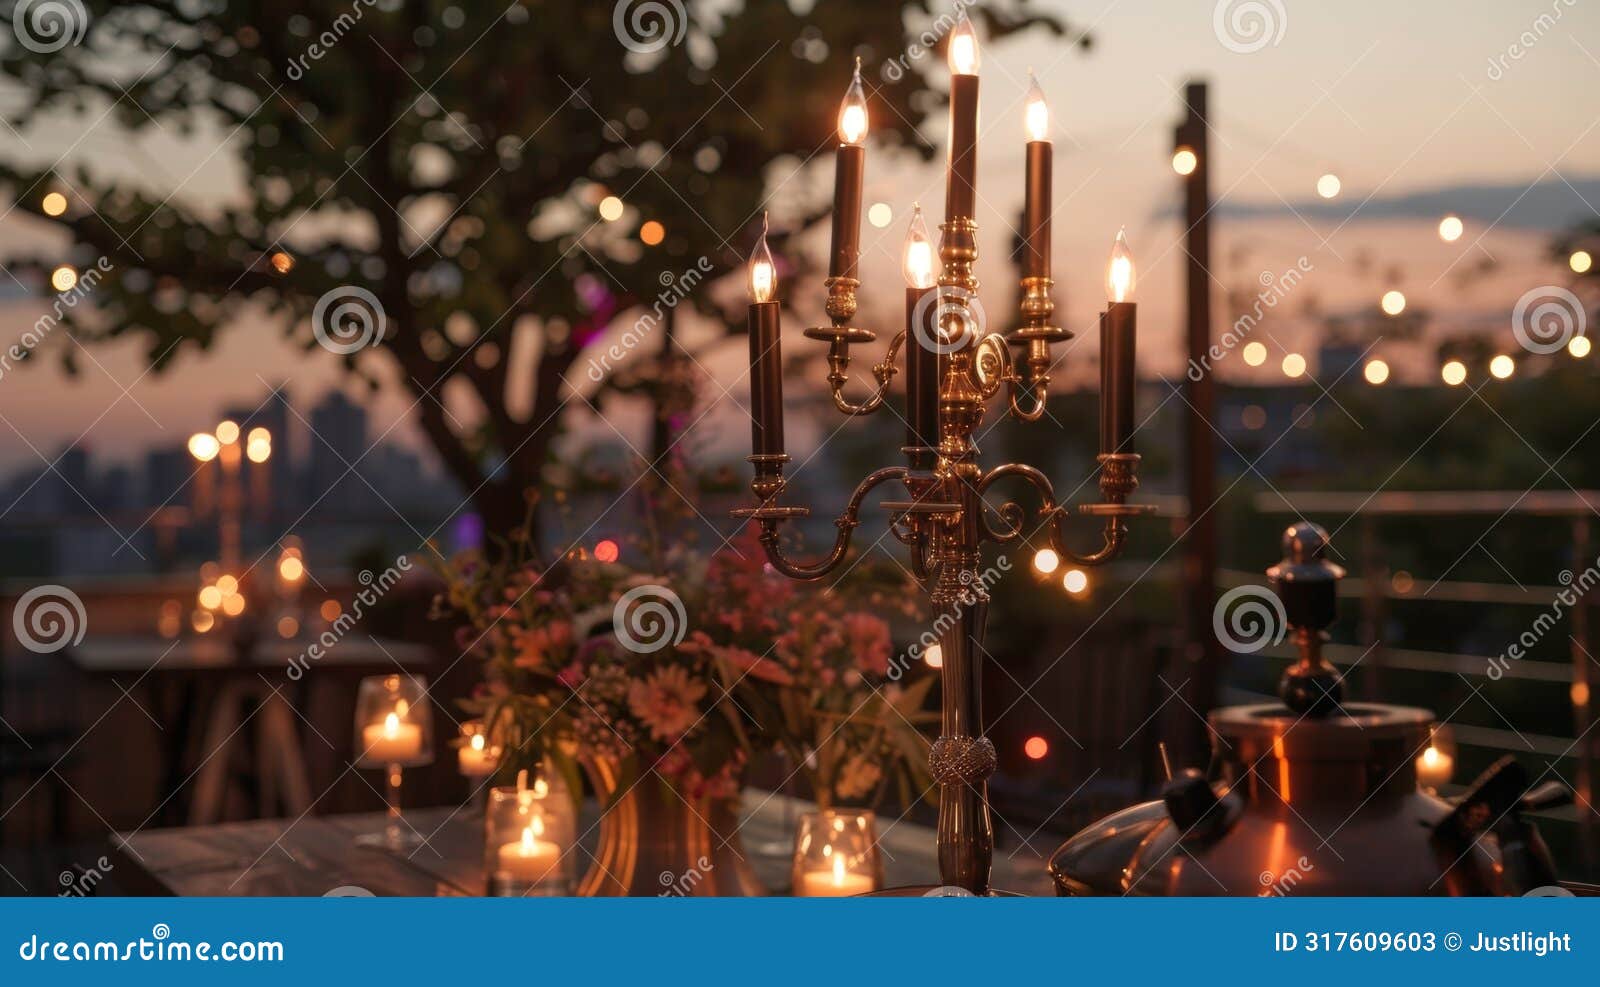 a tall slender candelabra stands tall a the telescopes adding a touch of elegance to the rustic rooftop setting. 2d flat